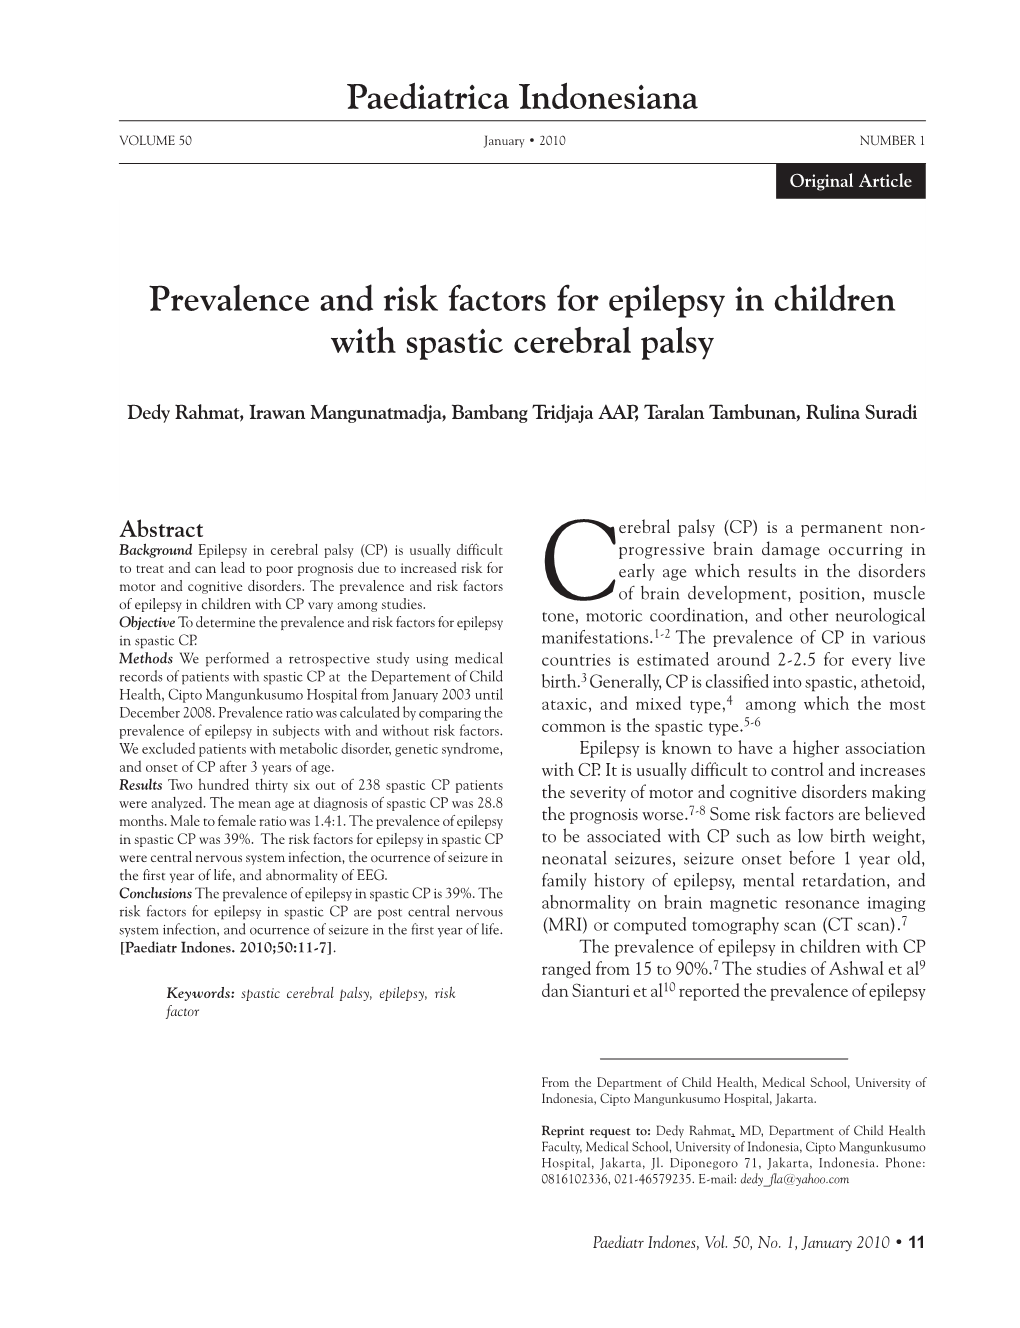 Paediatrica Indonesiana Prevalence and Risk Factors for Epilepsy In